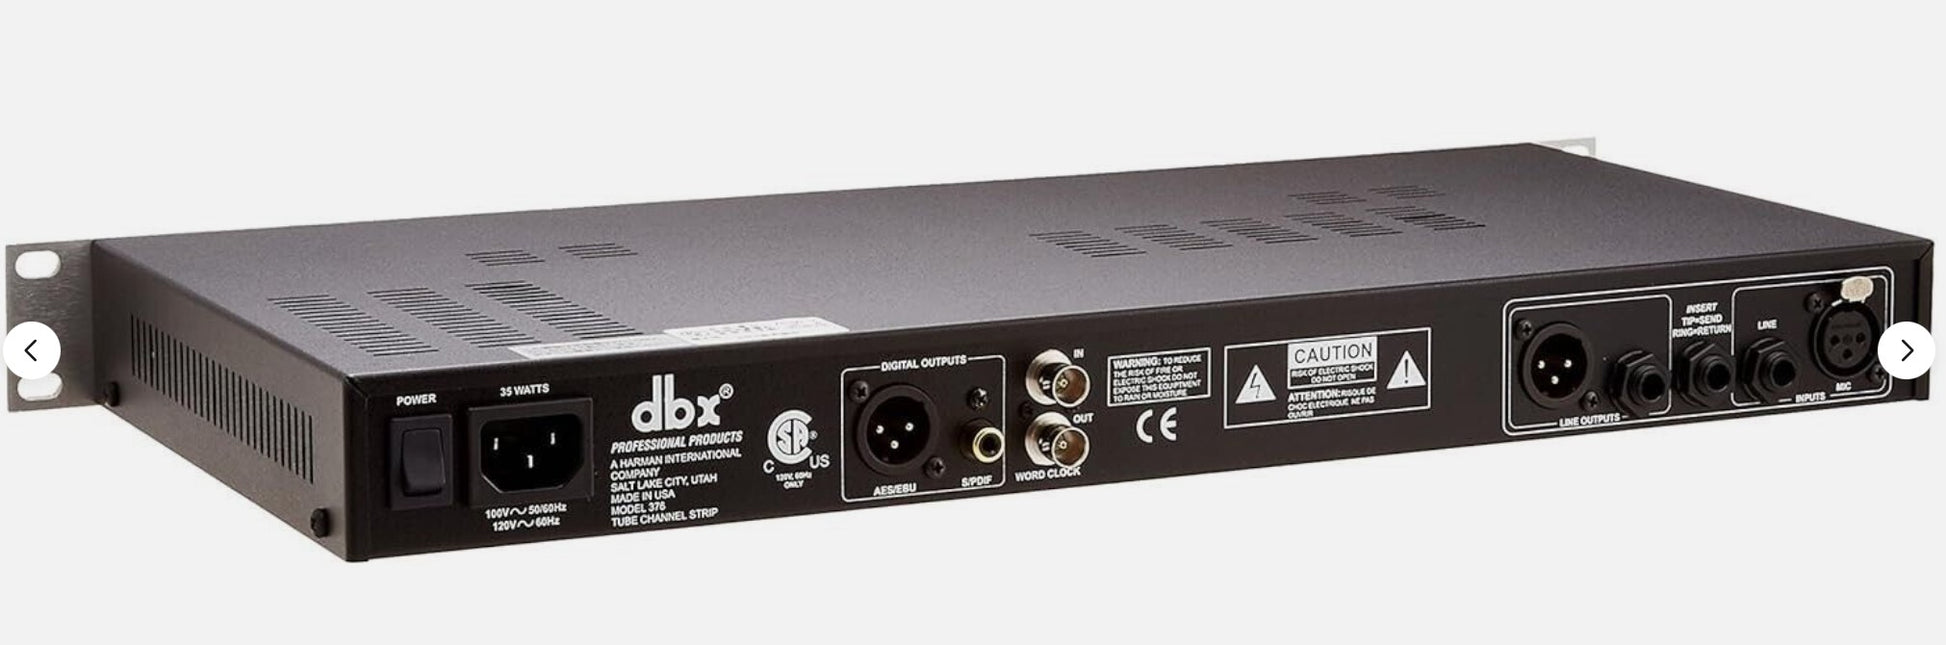 DBX 376 Tube Studio Channel Strip EQ/Compressor/DeEss/Gate/Digital Outs. 					We Sell Professional Audio Equipment. Audio Systems, Amplifiers, Consoles, Mixers, Electronics, Entertainment, Sound, Live.